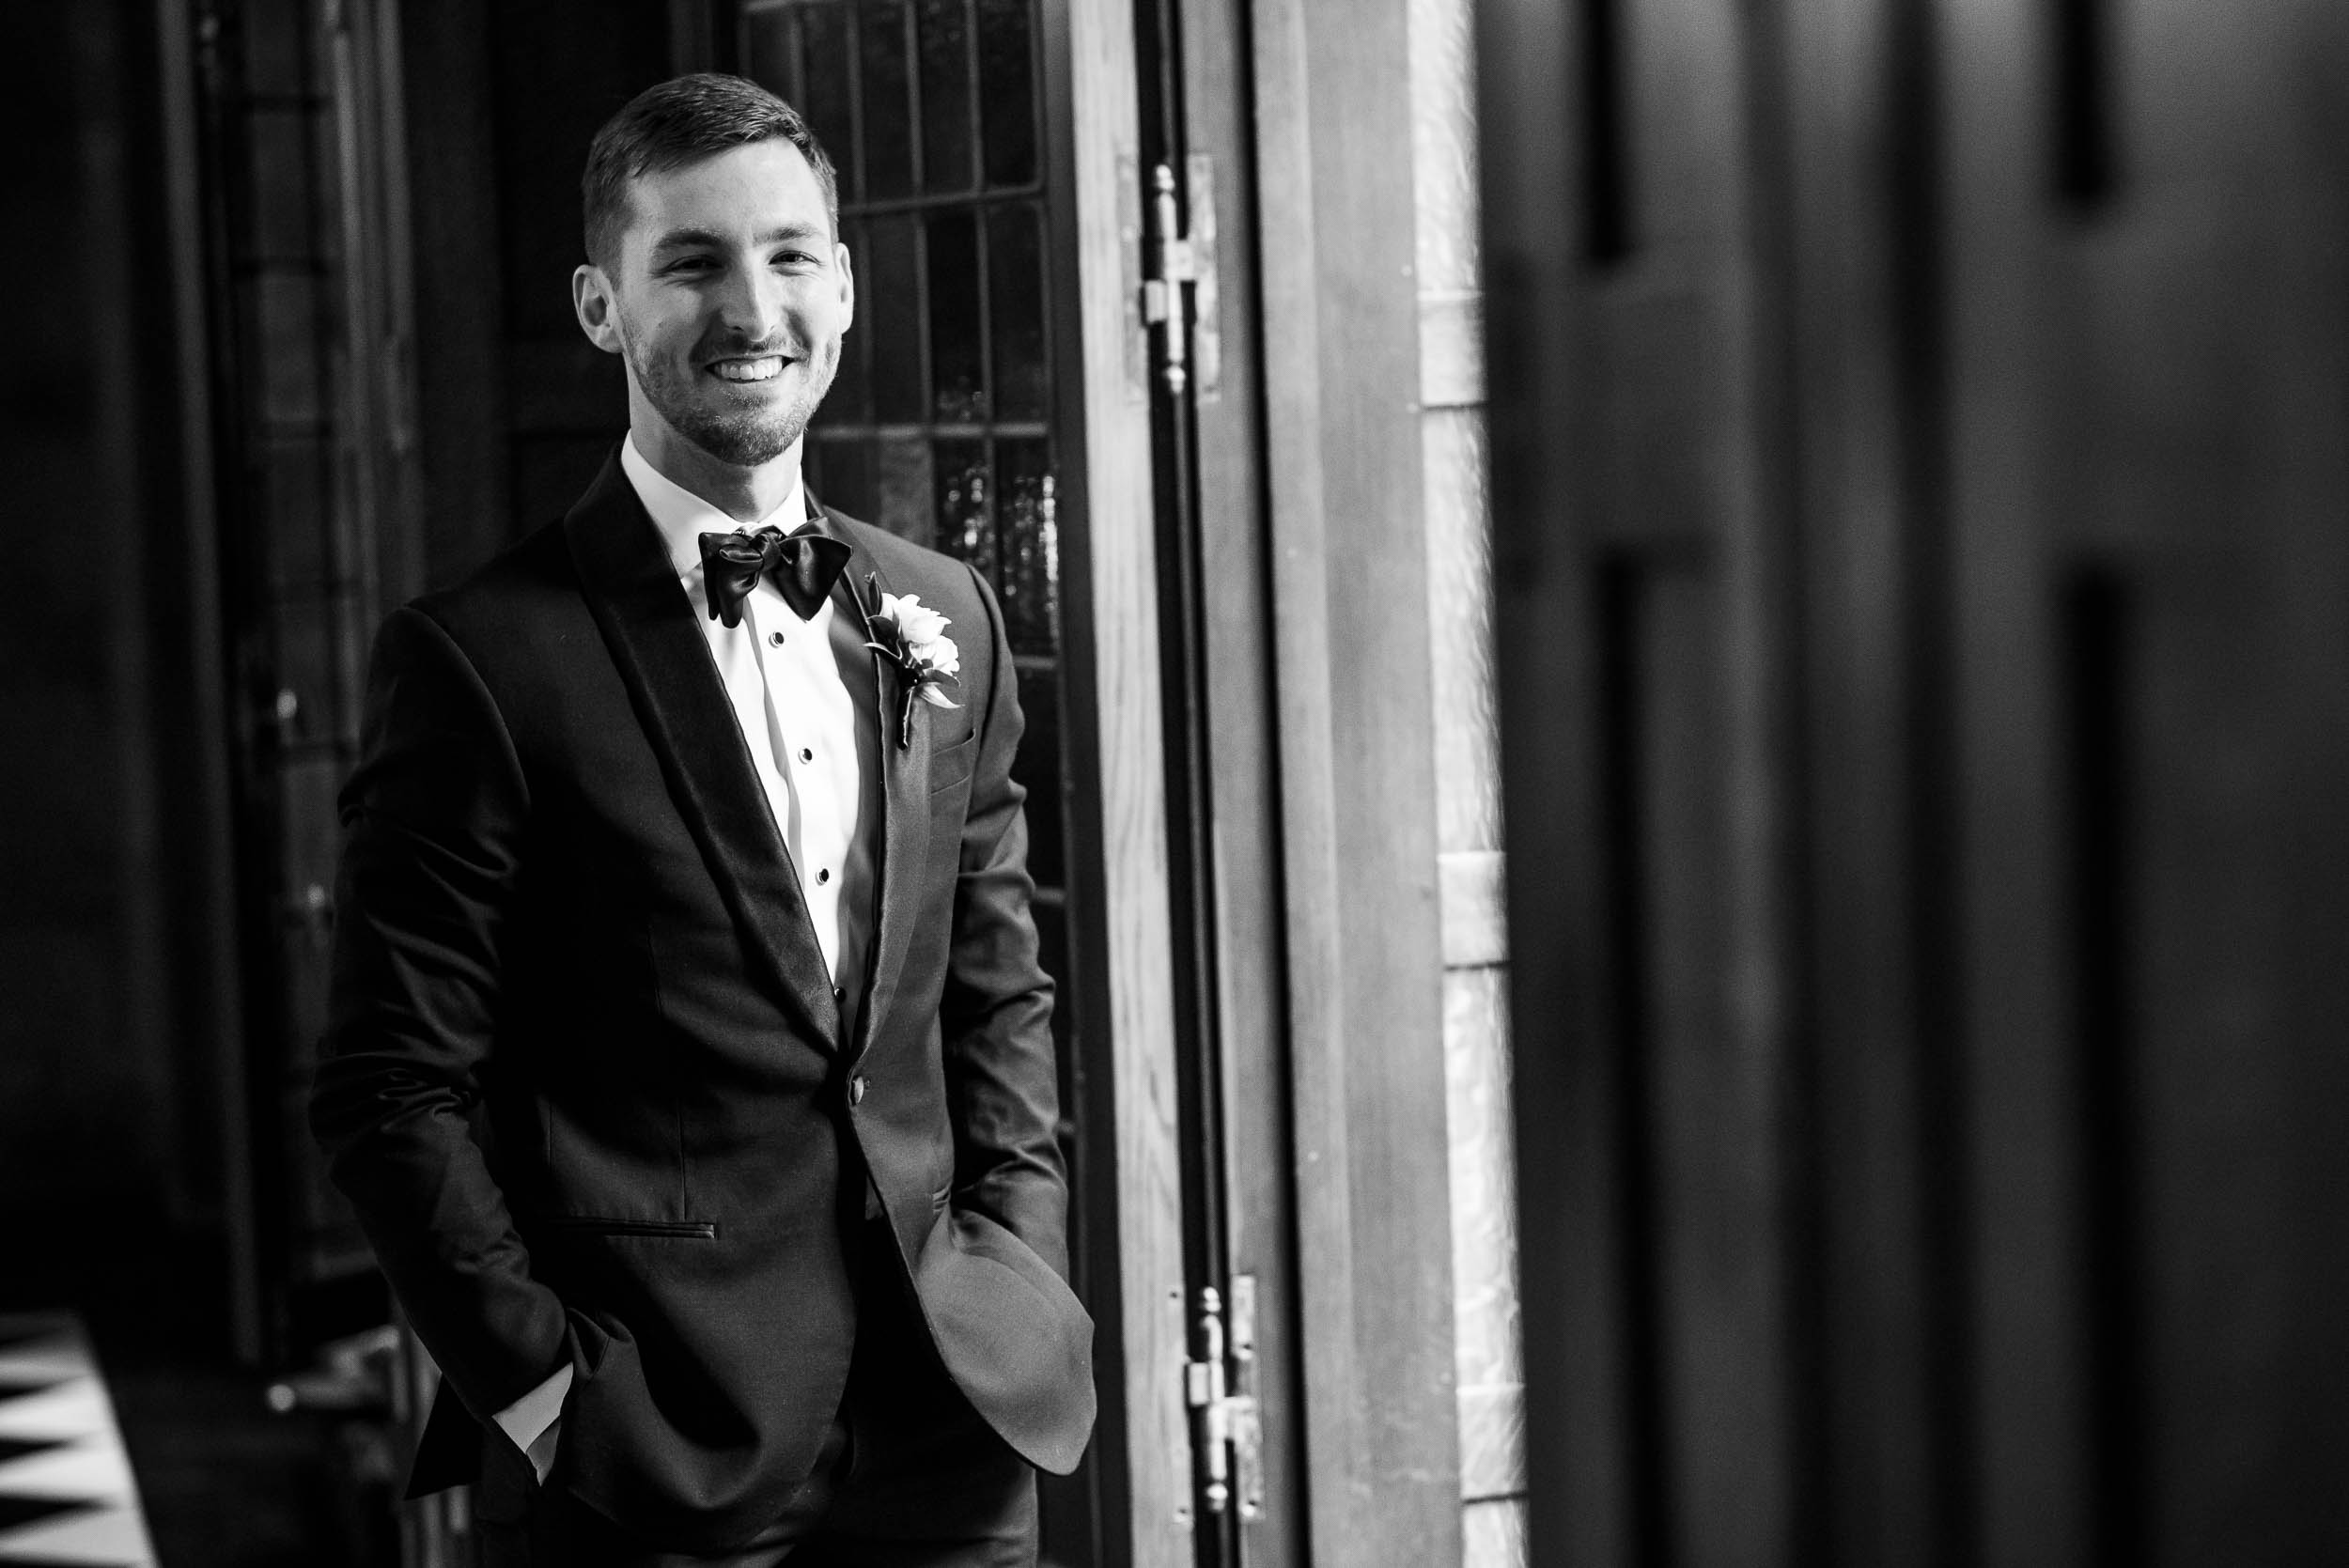 Groom ready for the ceremony during a Blackstone Chicago wedding.